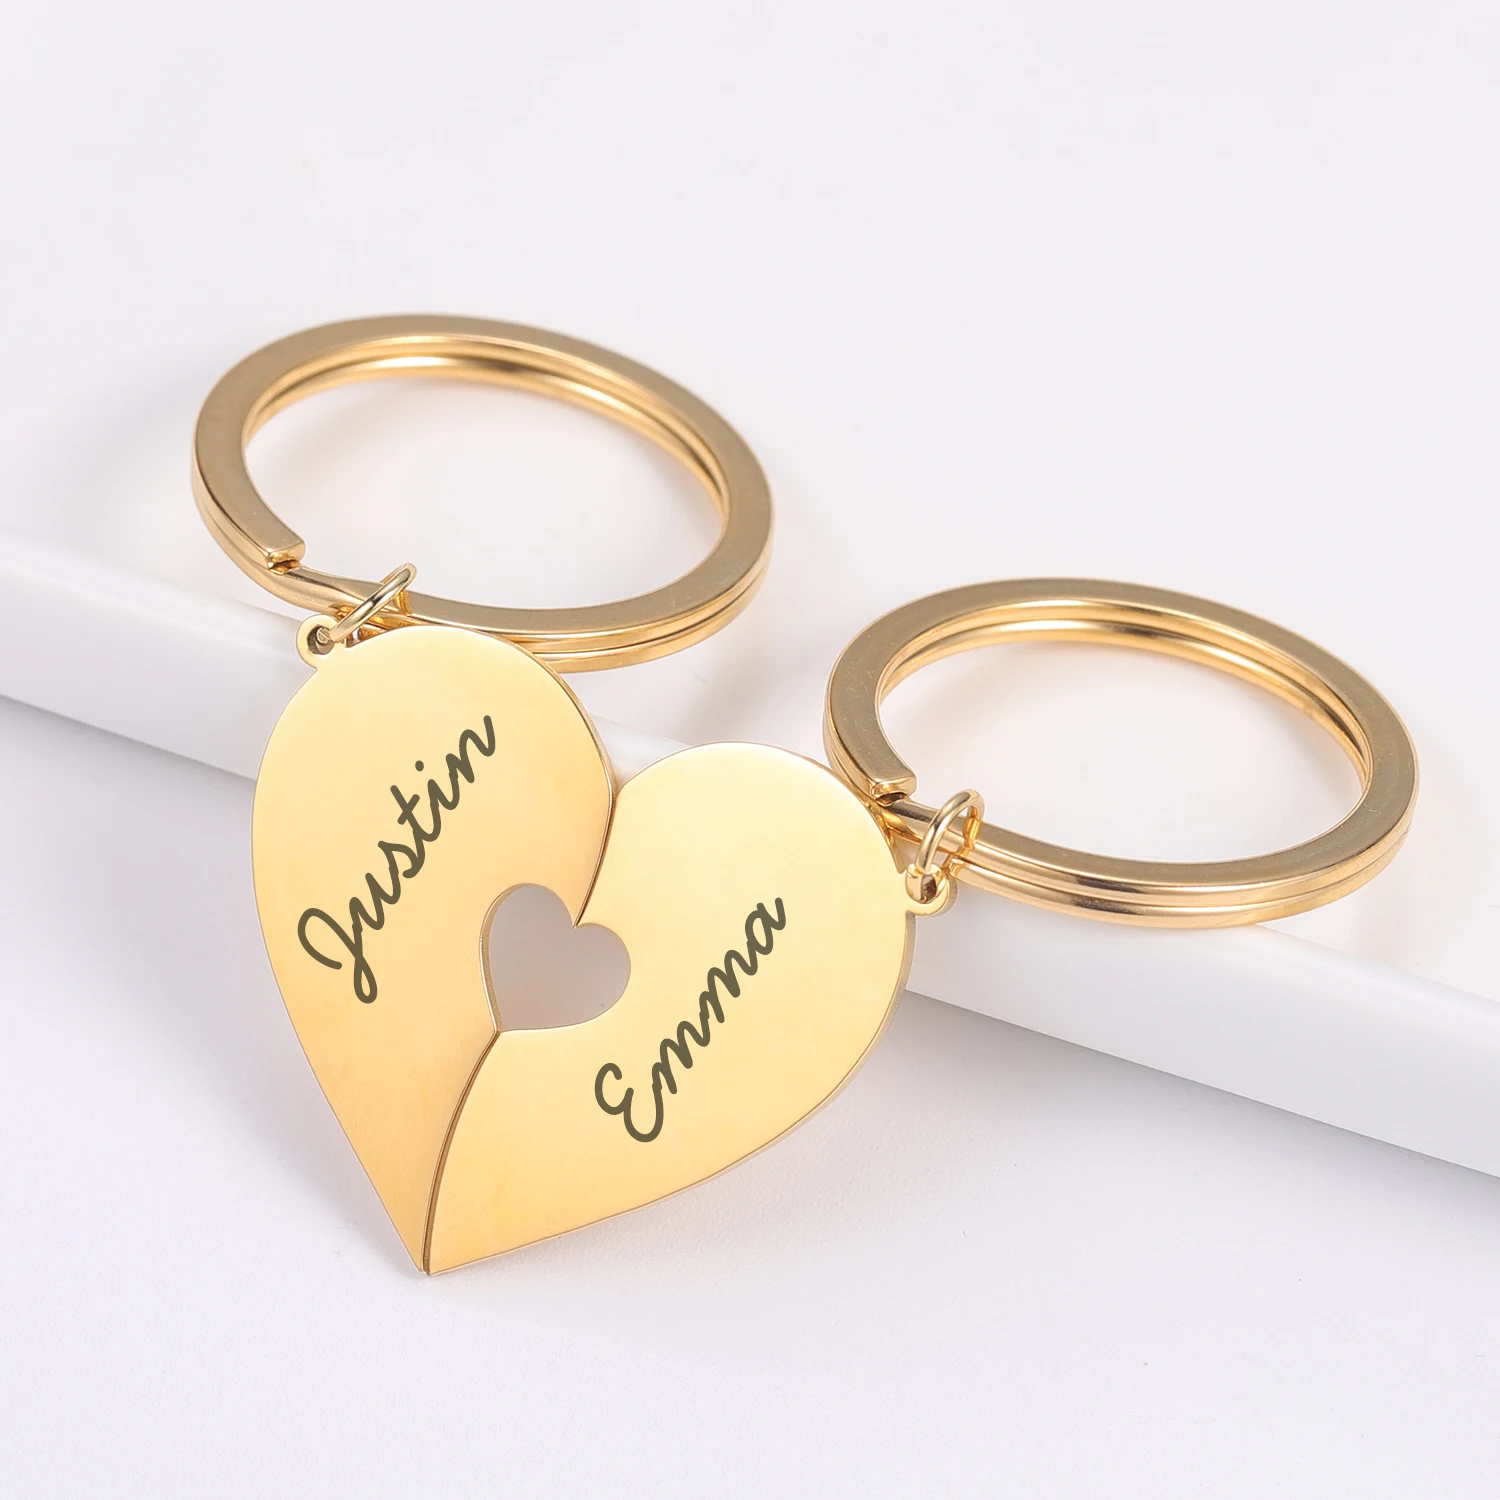 2Pcs Personalized Couples Keychain Valentine Anniversary Gift Boyfriend Girlfriend Heart KeyChain Man Women Key Chain Love Gifts i love my boyfriend clothes i love my girlfriend shirt so please stay away from me funny bf gf sayings quote valentine hoodies